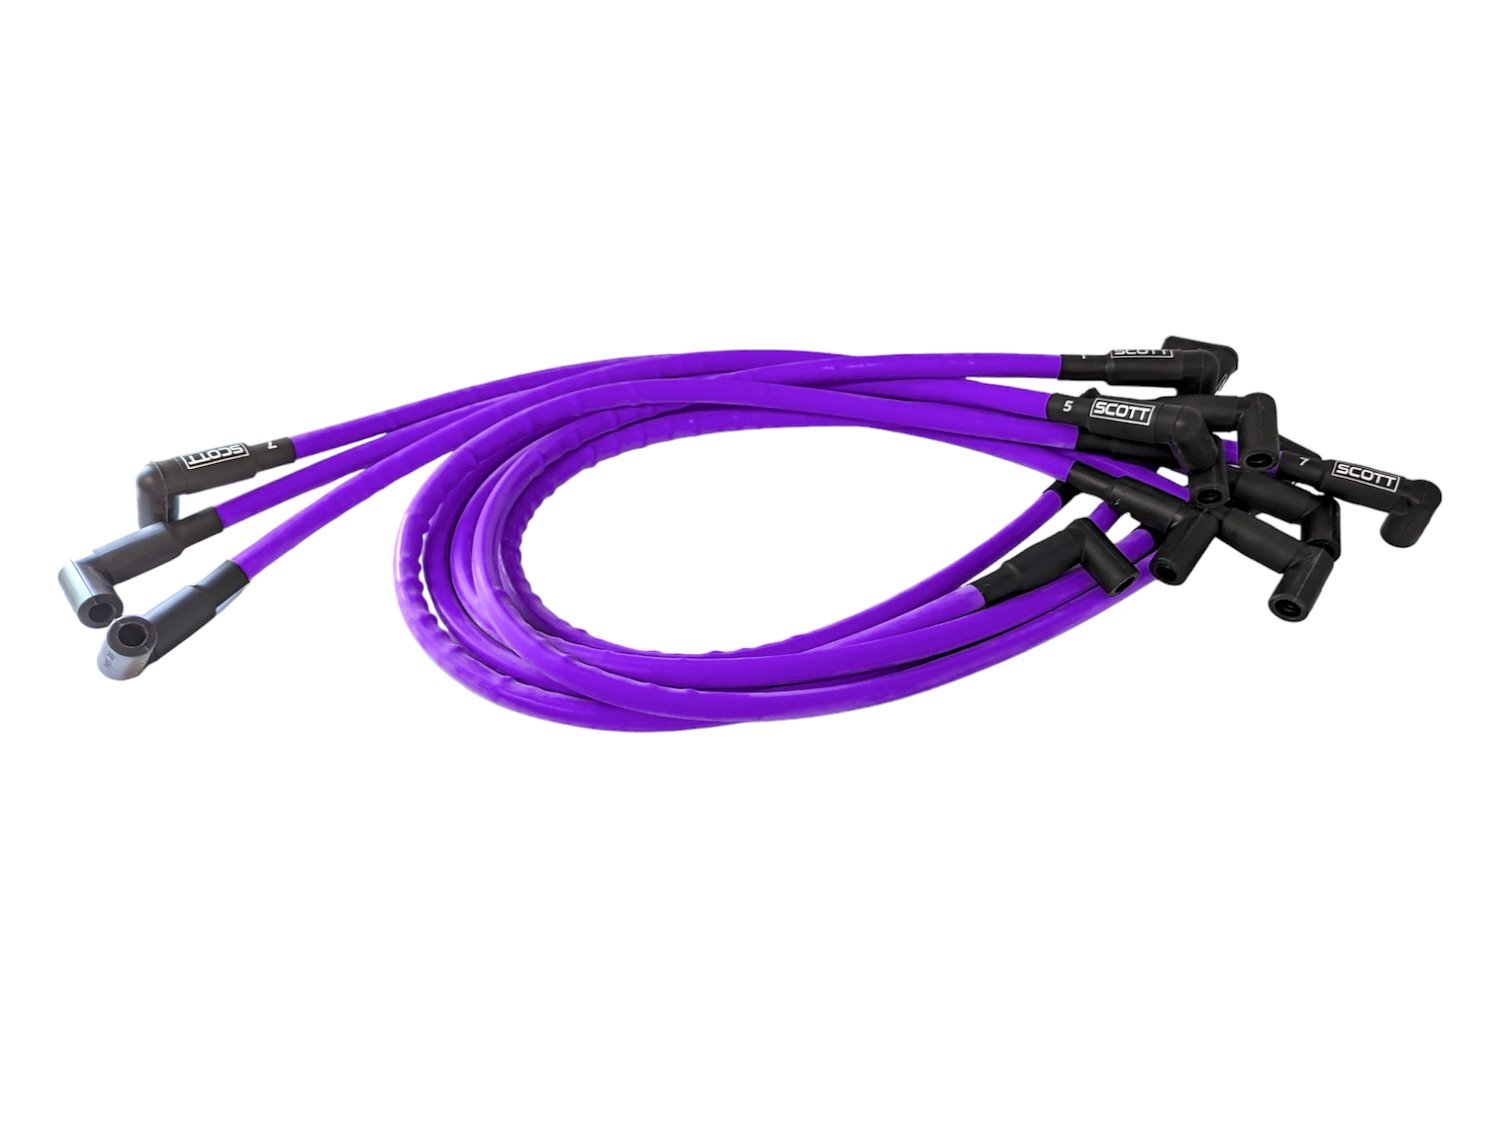 SPW-CH-439-6 High-Performance Silicone-Sleeved Spark Plug Wire Set for Small Block Ford, Under Header [Purple]